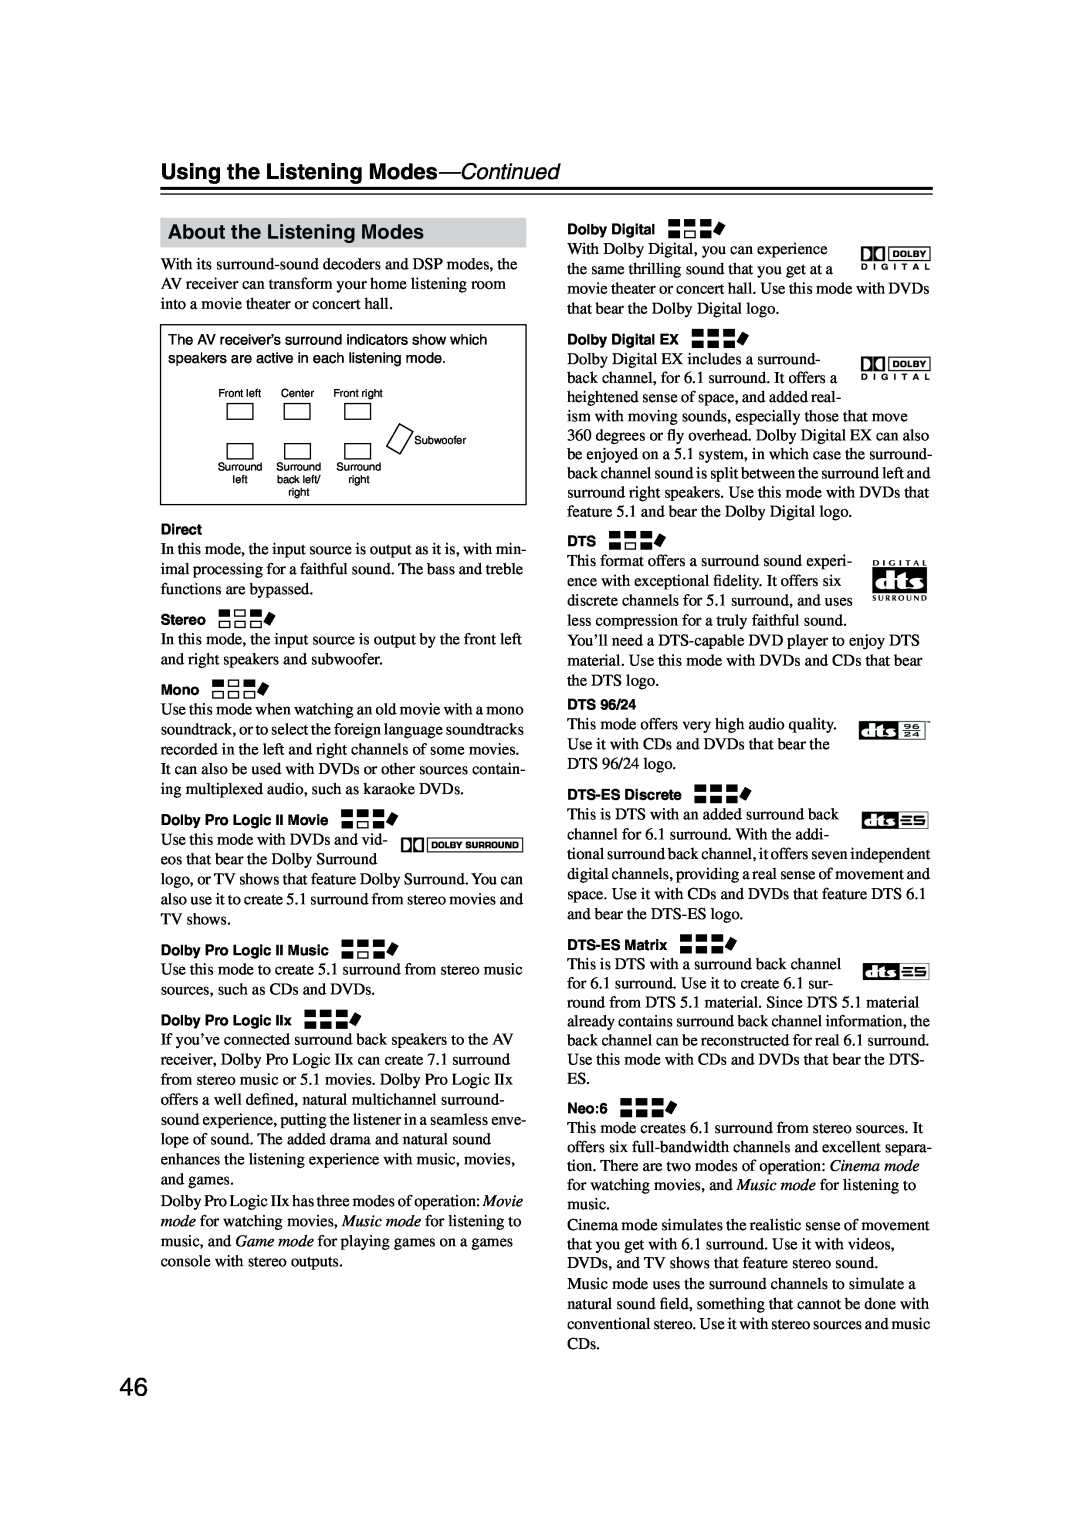 Onkyo TX-SR573 instruction manual About the Listening Modes, Using the Listening Modes—Continued 